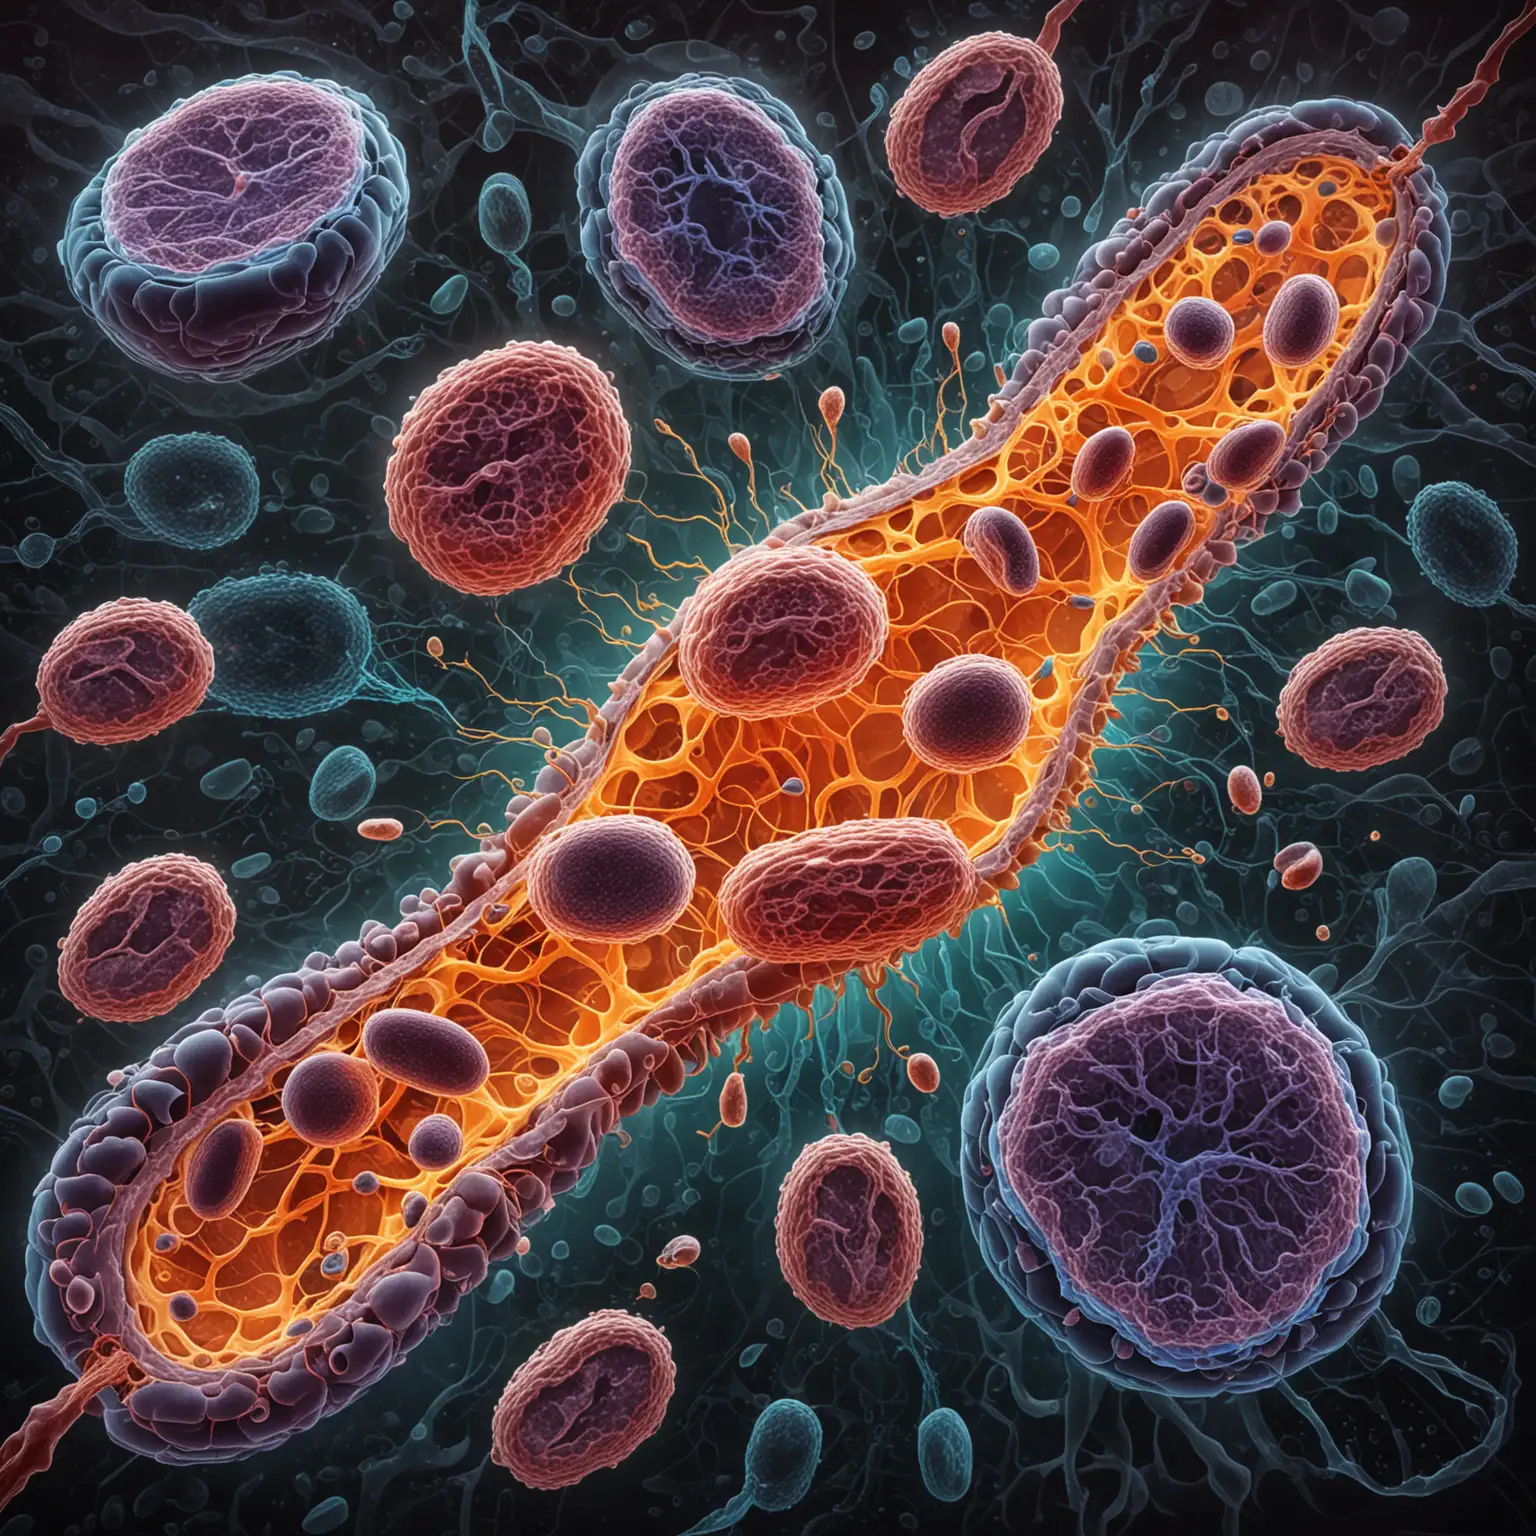 An abstract depiction of mitochondria and cells, with the mitochondria appearing damaged or broken. Include an indication of dysfunction, such as an irregular cellular structure or lack of energy production. Use a color scheme that conveys illness or distress.